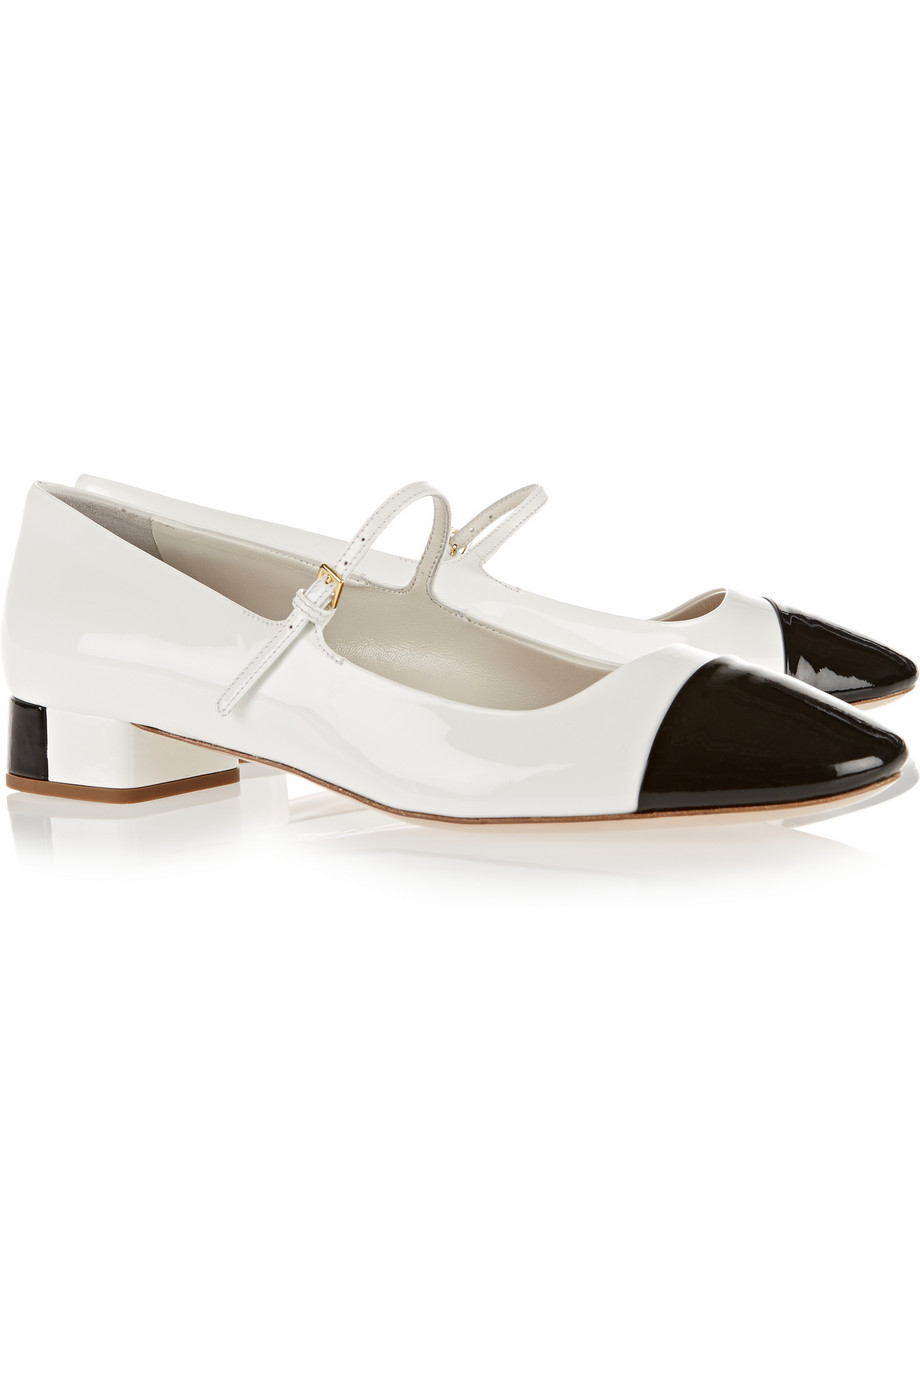 Miu Miu Two-Tone Patent-Leather Mary Flats in White | Lyst